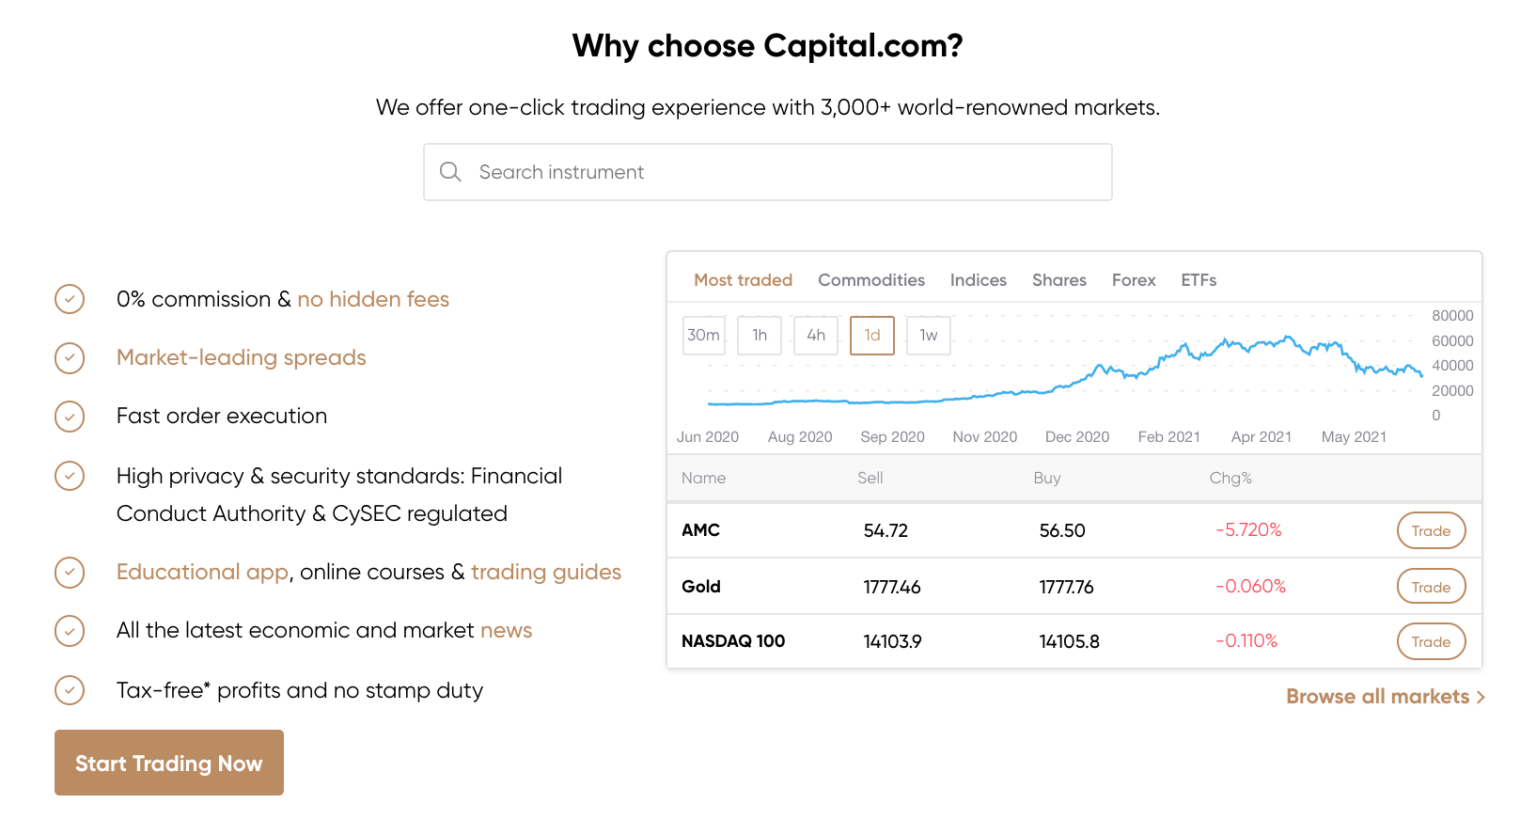 which is best crypto broker in terms of deposit